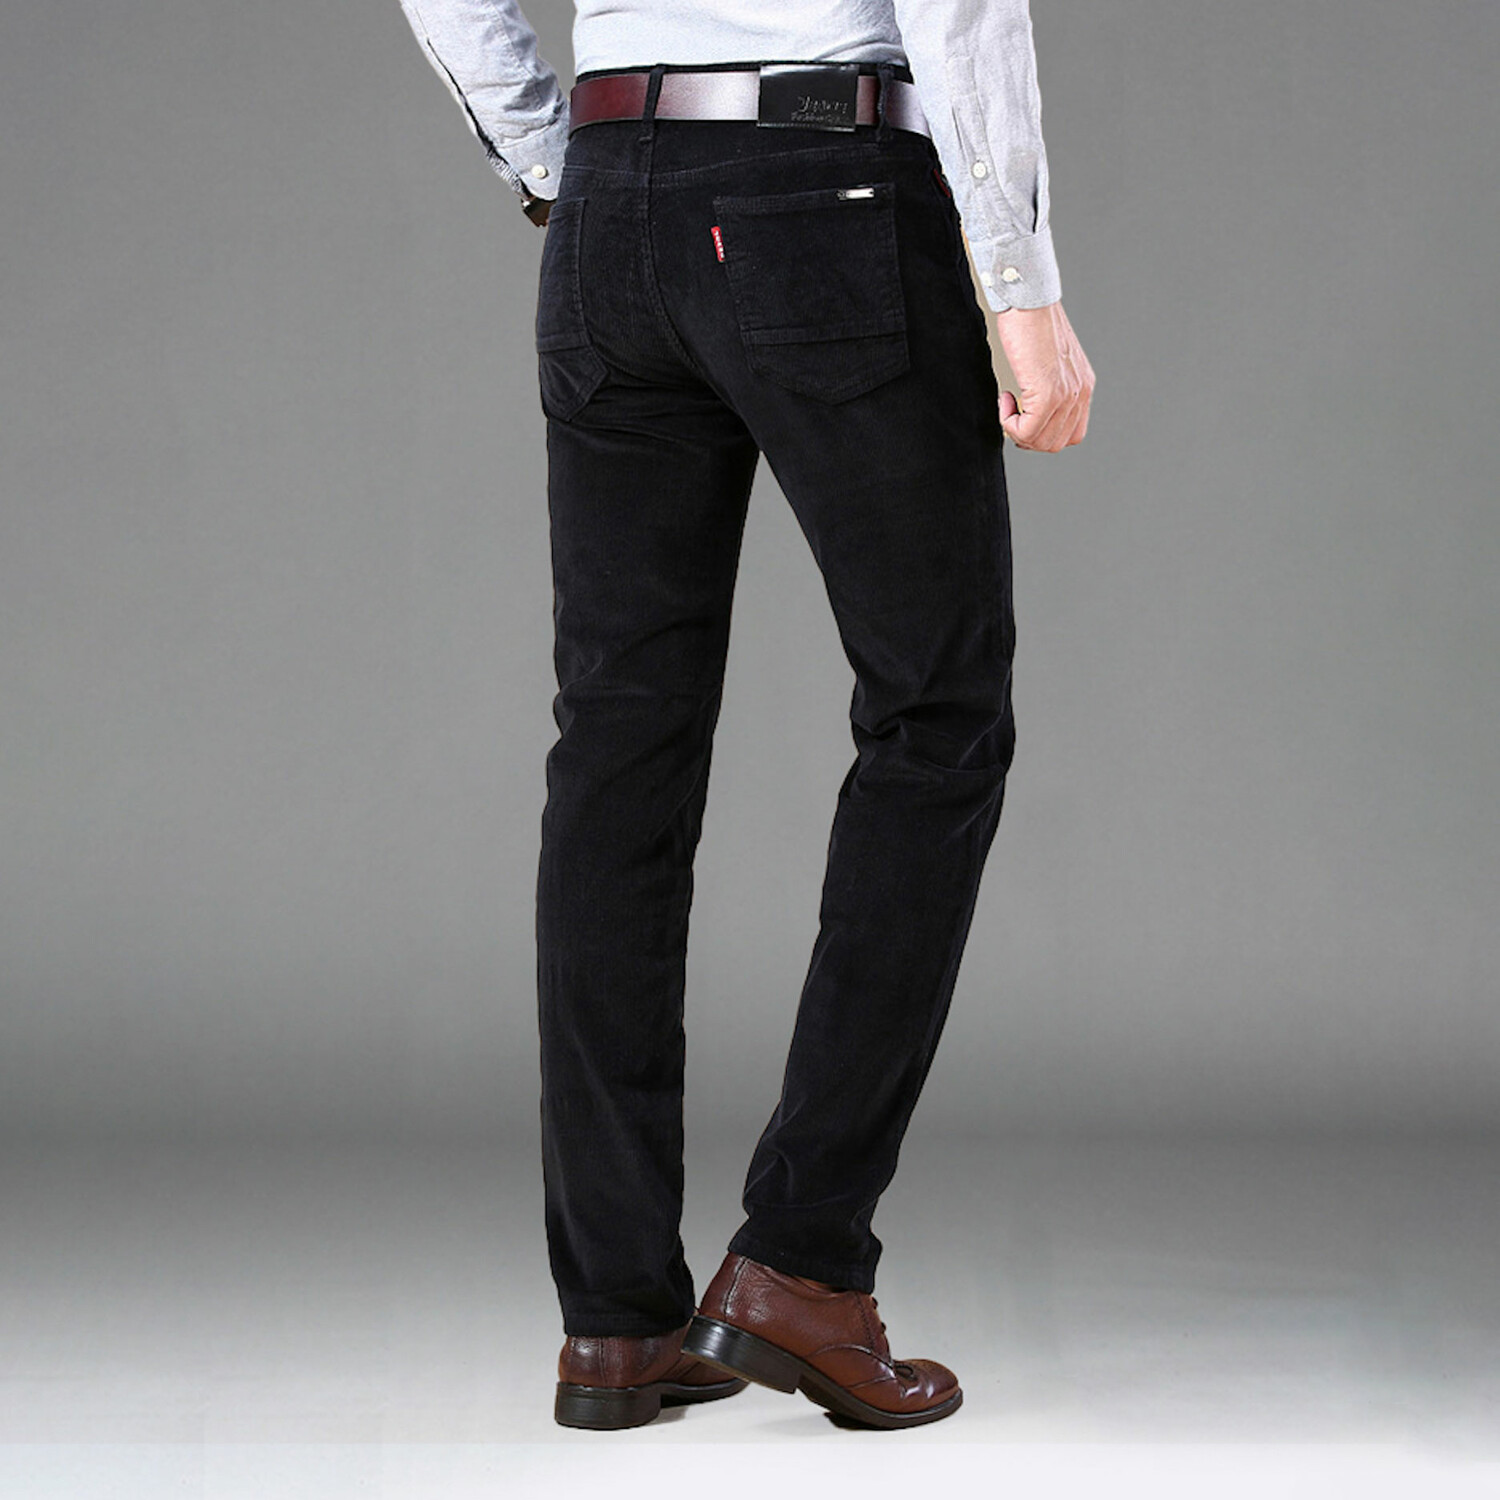 Relaxed Fit Business Casual Corduroy Pants Corduroy Pants // Black ...